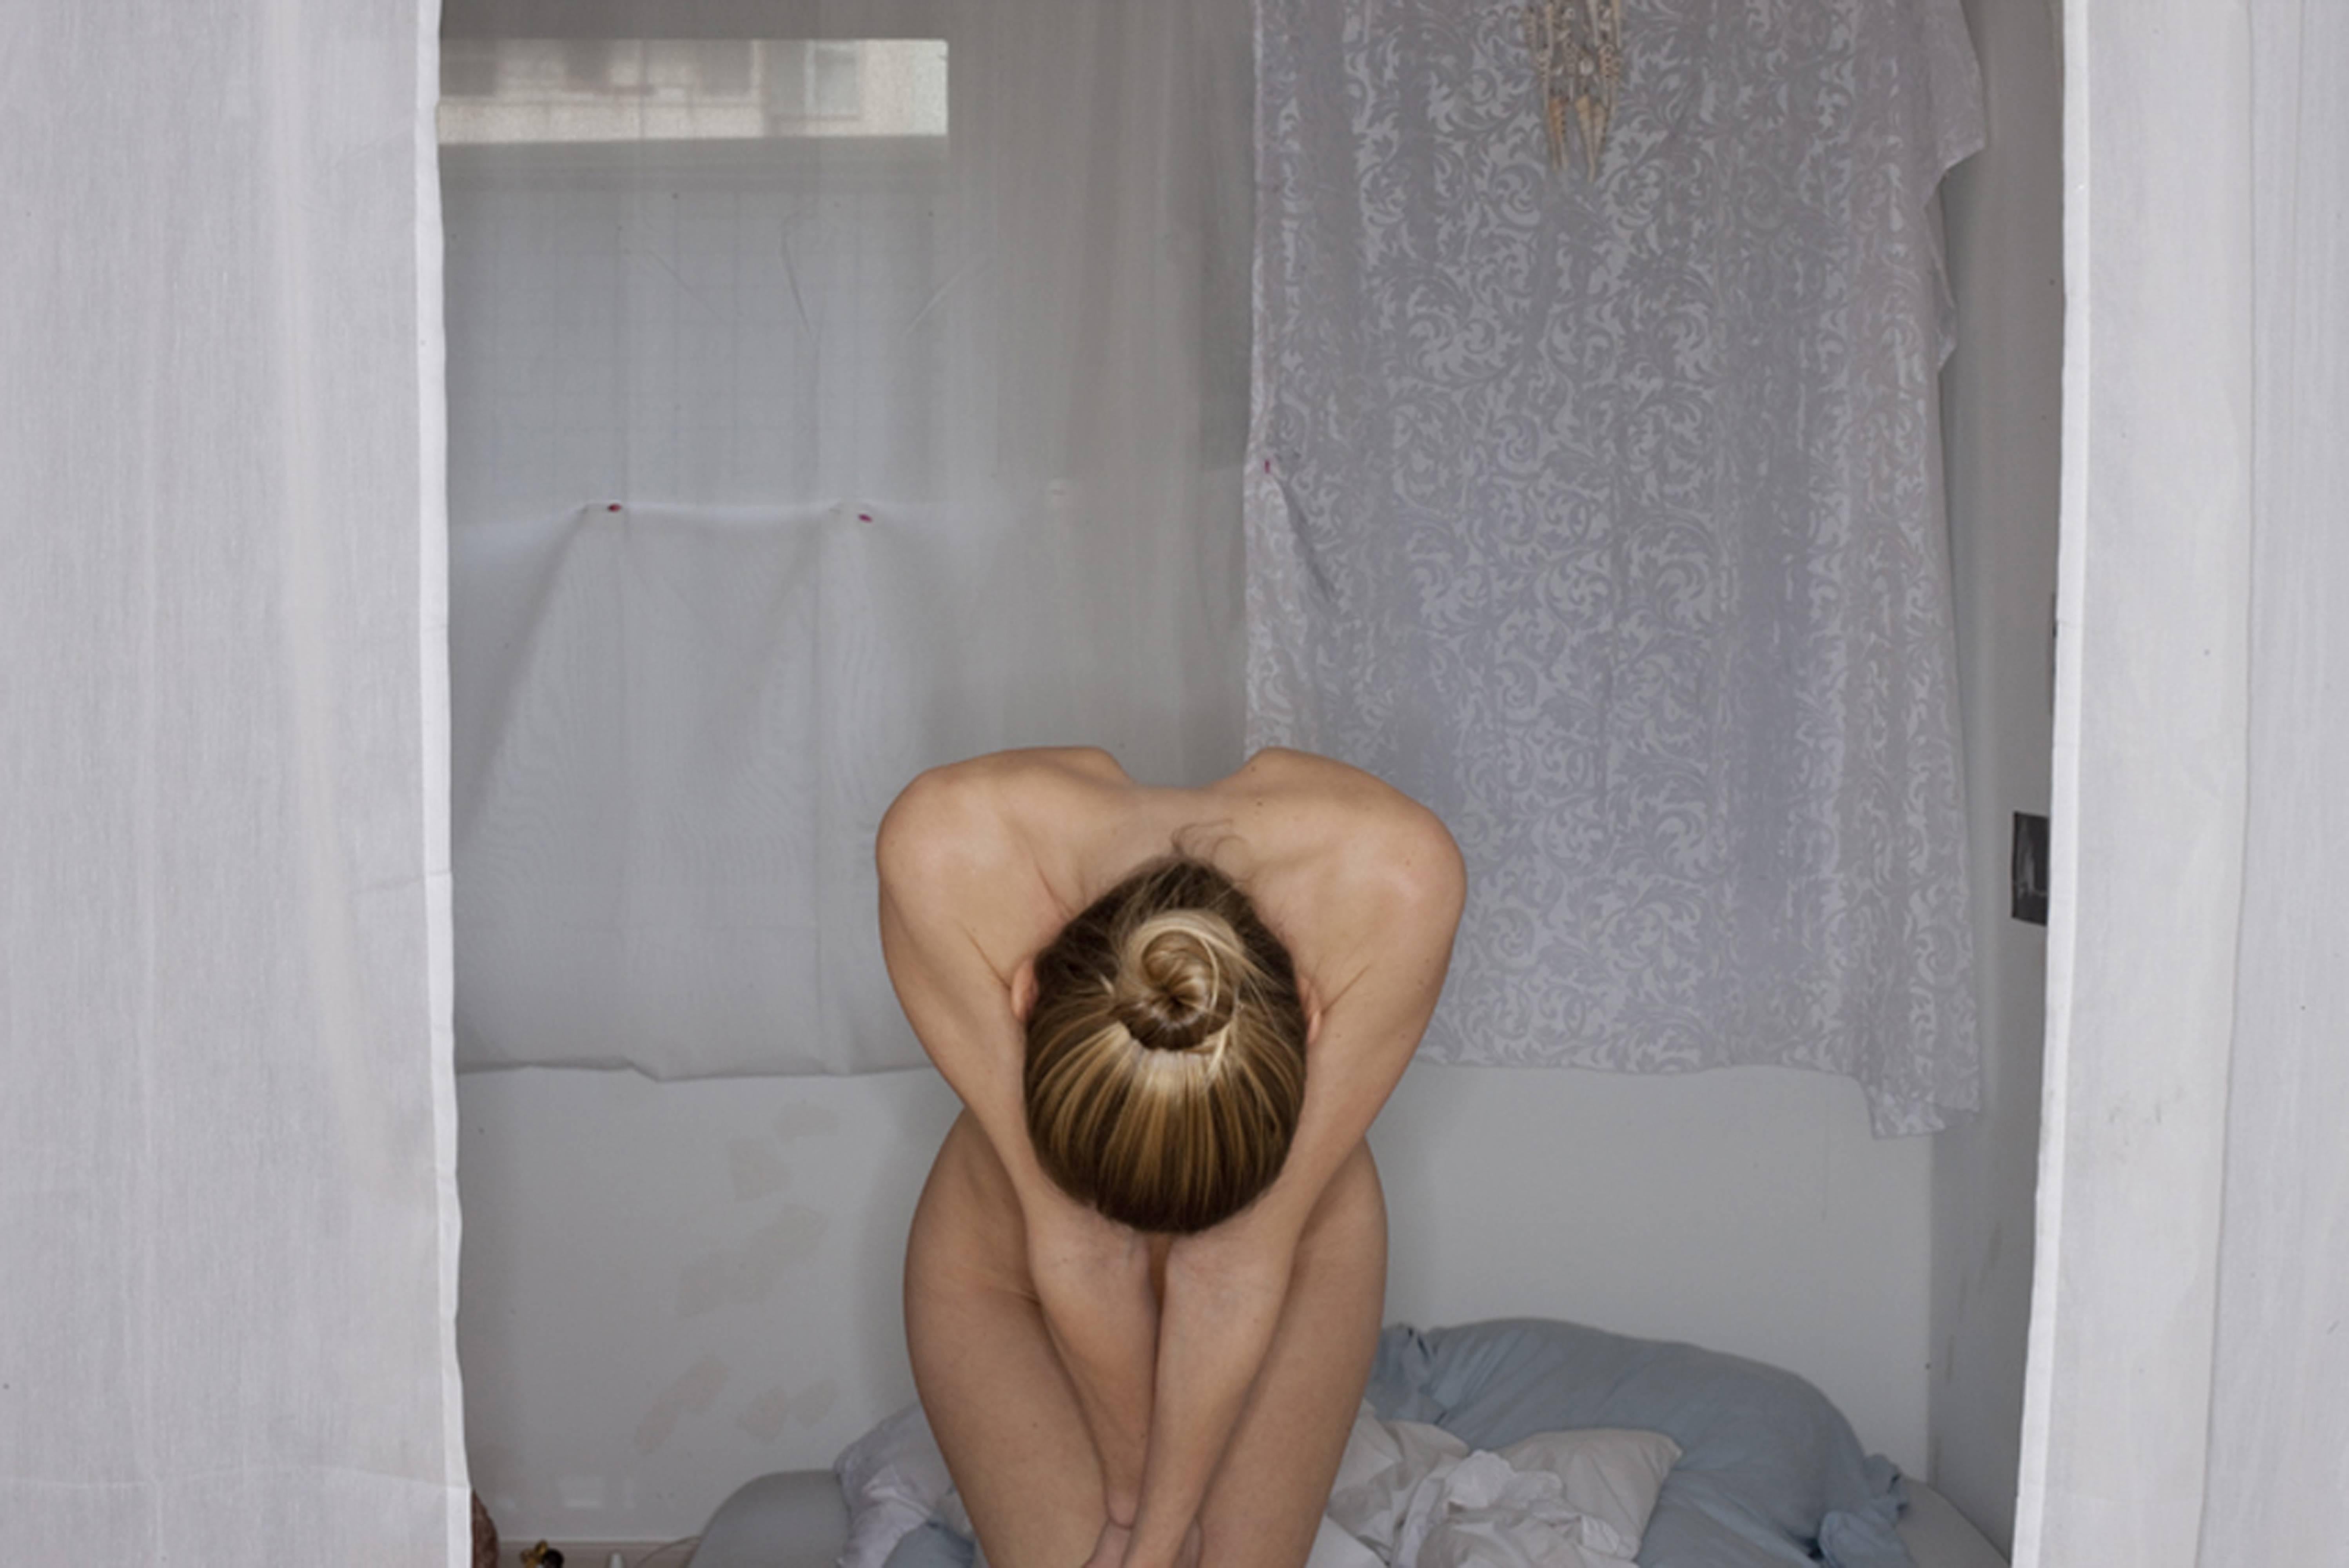 Bowing Girl - Photograph by Christian Vogt